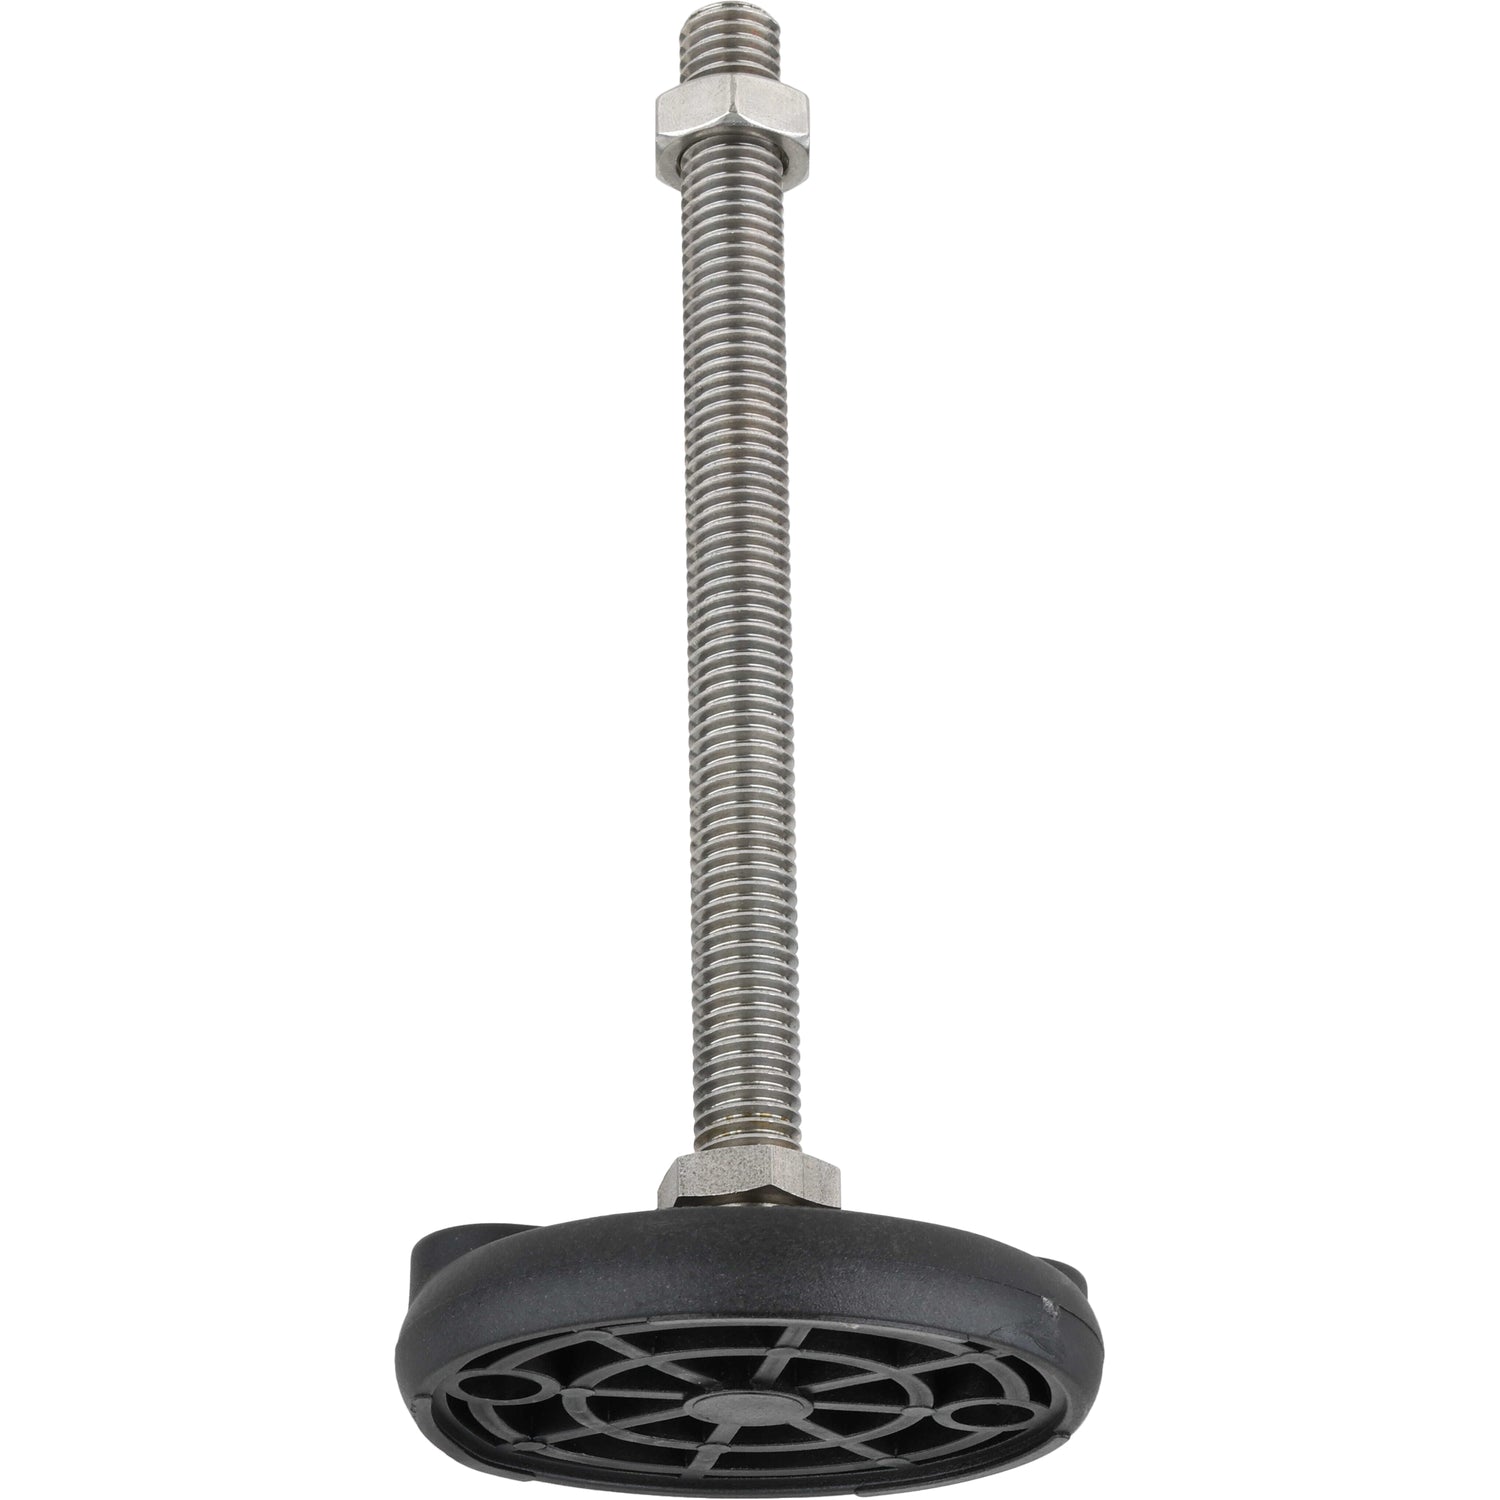 Threaded stainless steel post with stainless steel hex nut threaded on top, pressed into a circular black plastic base. Underside of plastic base is shown.  Shown on a white background. 